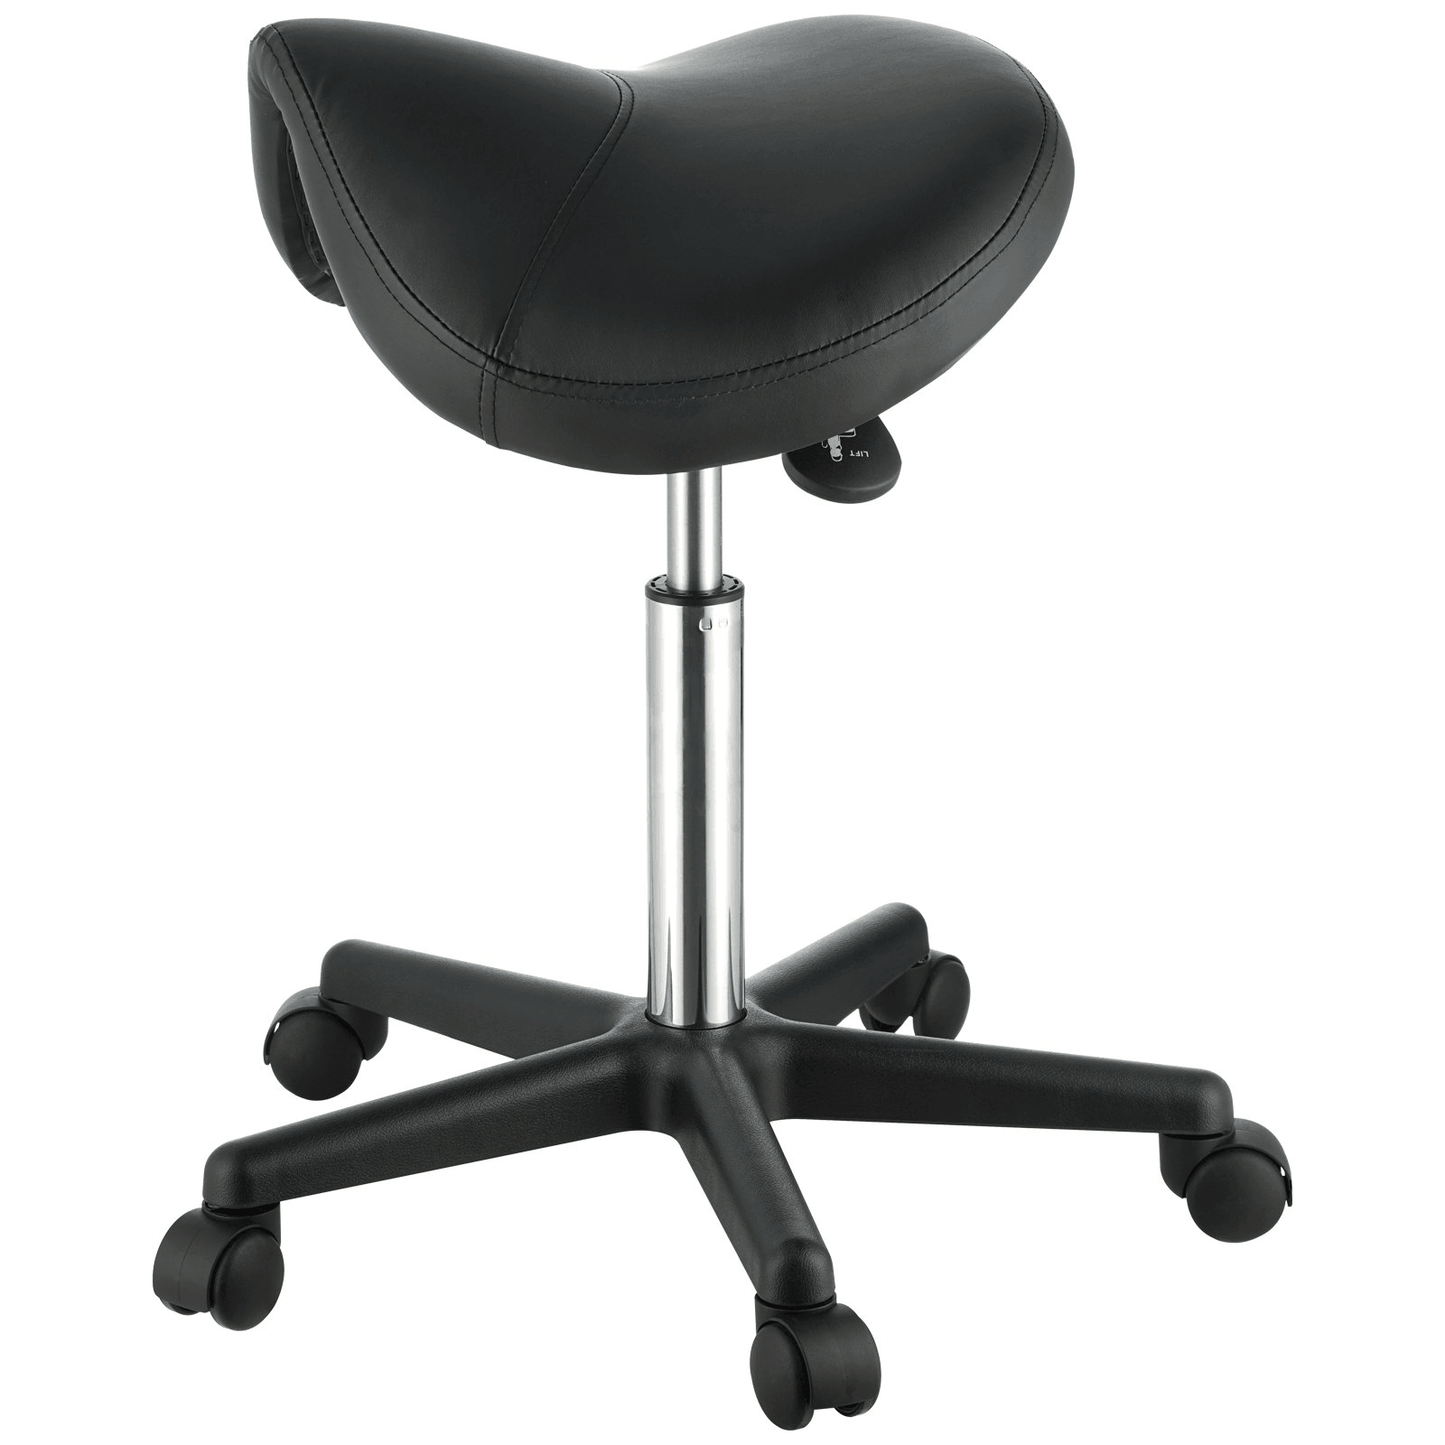 VEVOR Saddle Stool with Wheels, 400 LBS Weight Capacity, Height Adjustable Thickened PU Leather Swivel Saddle Stool Chair for Salon, Spa, Tattoo, Clinic, Black - Loomini